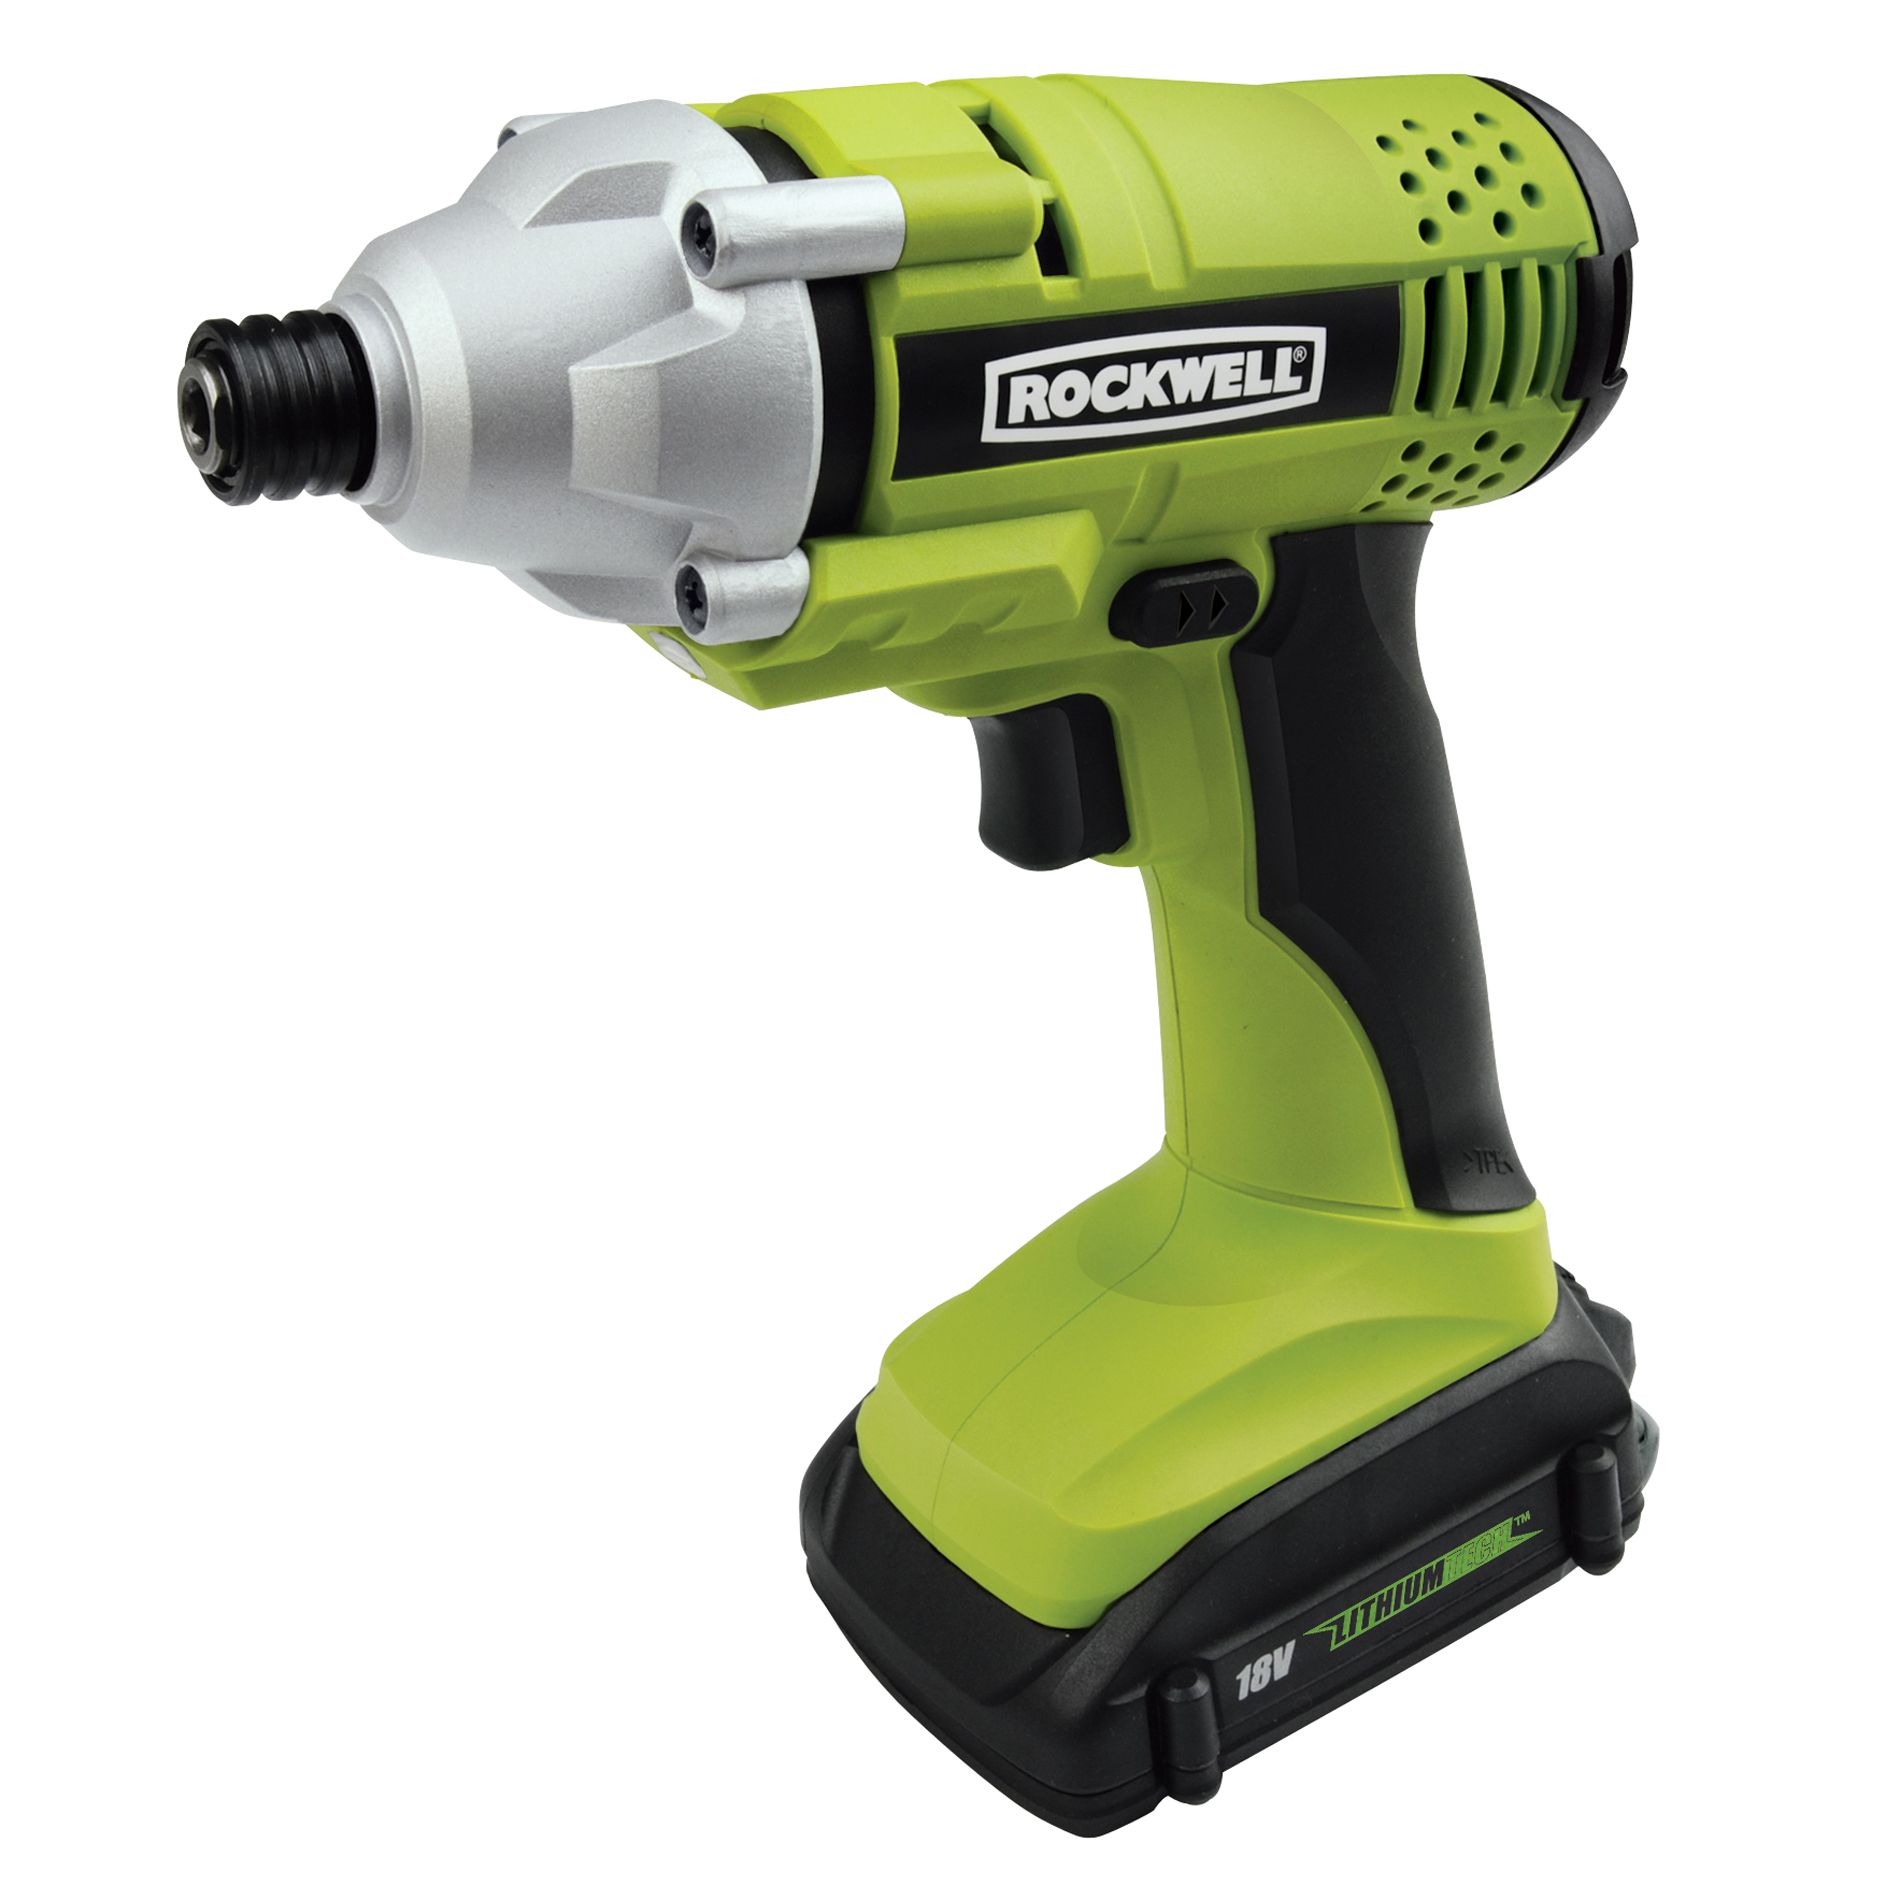 Rockwell 18V A 1\/4 in. Lithium Impact Driver